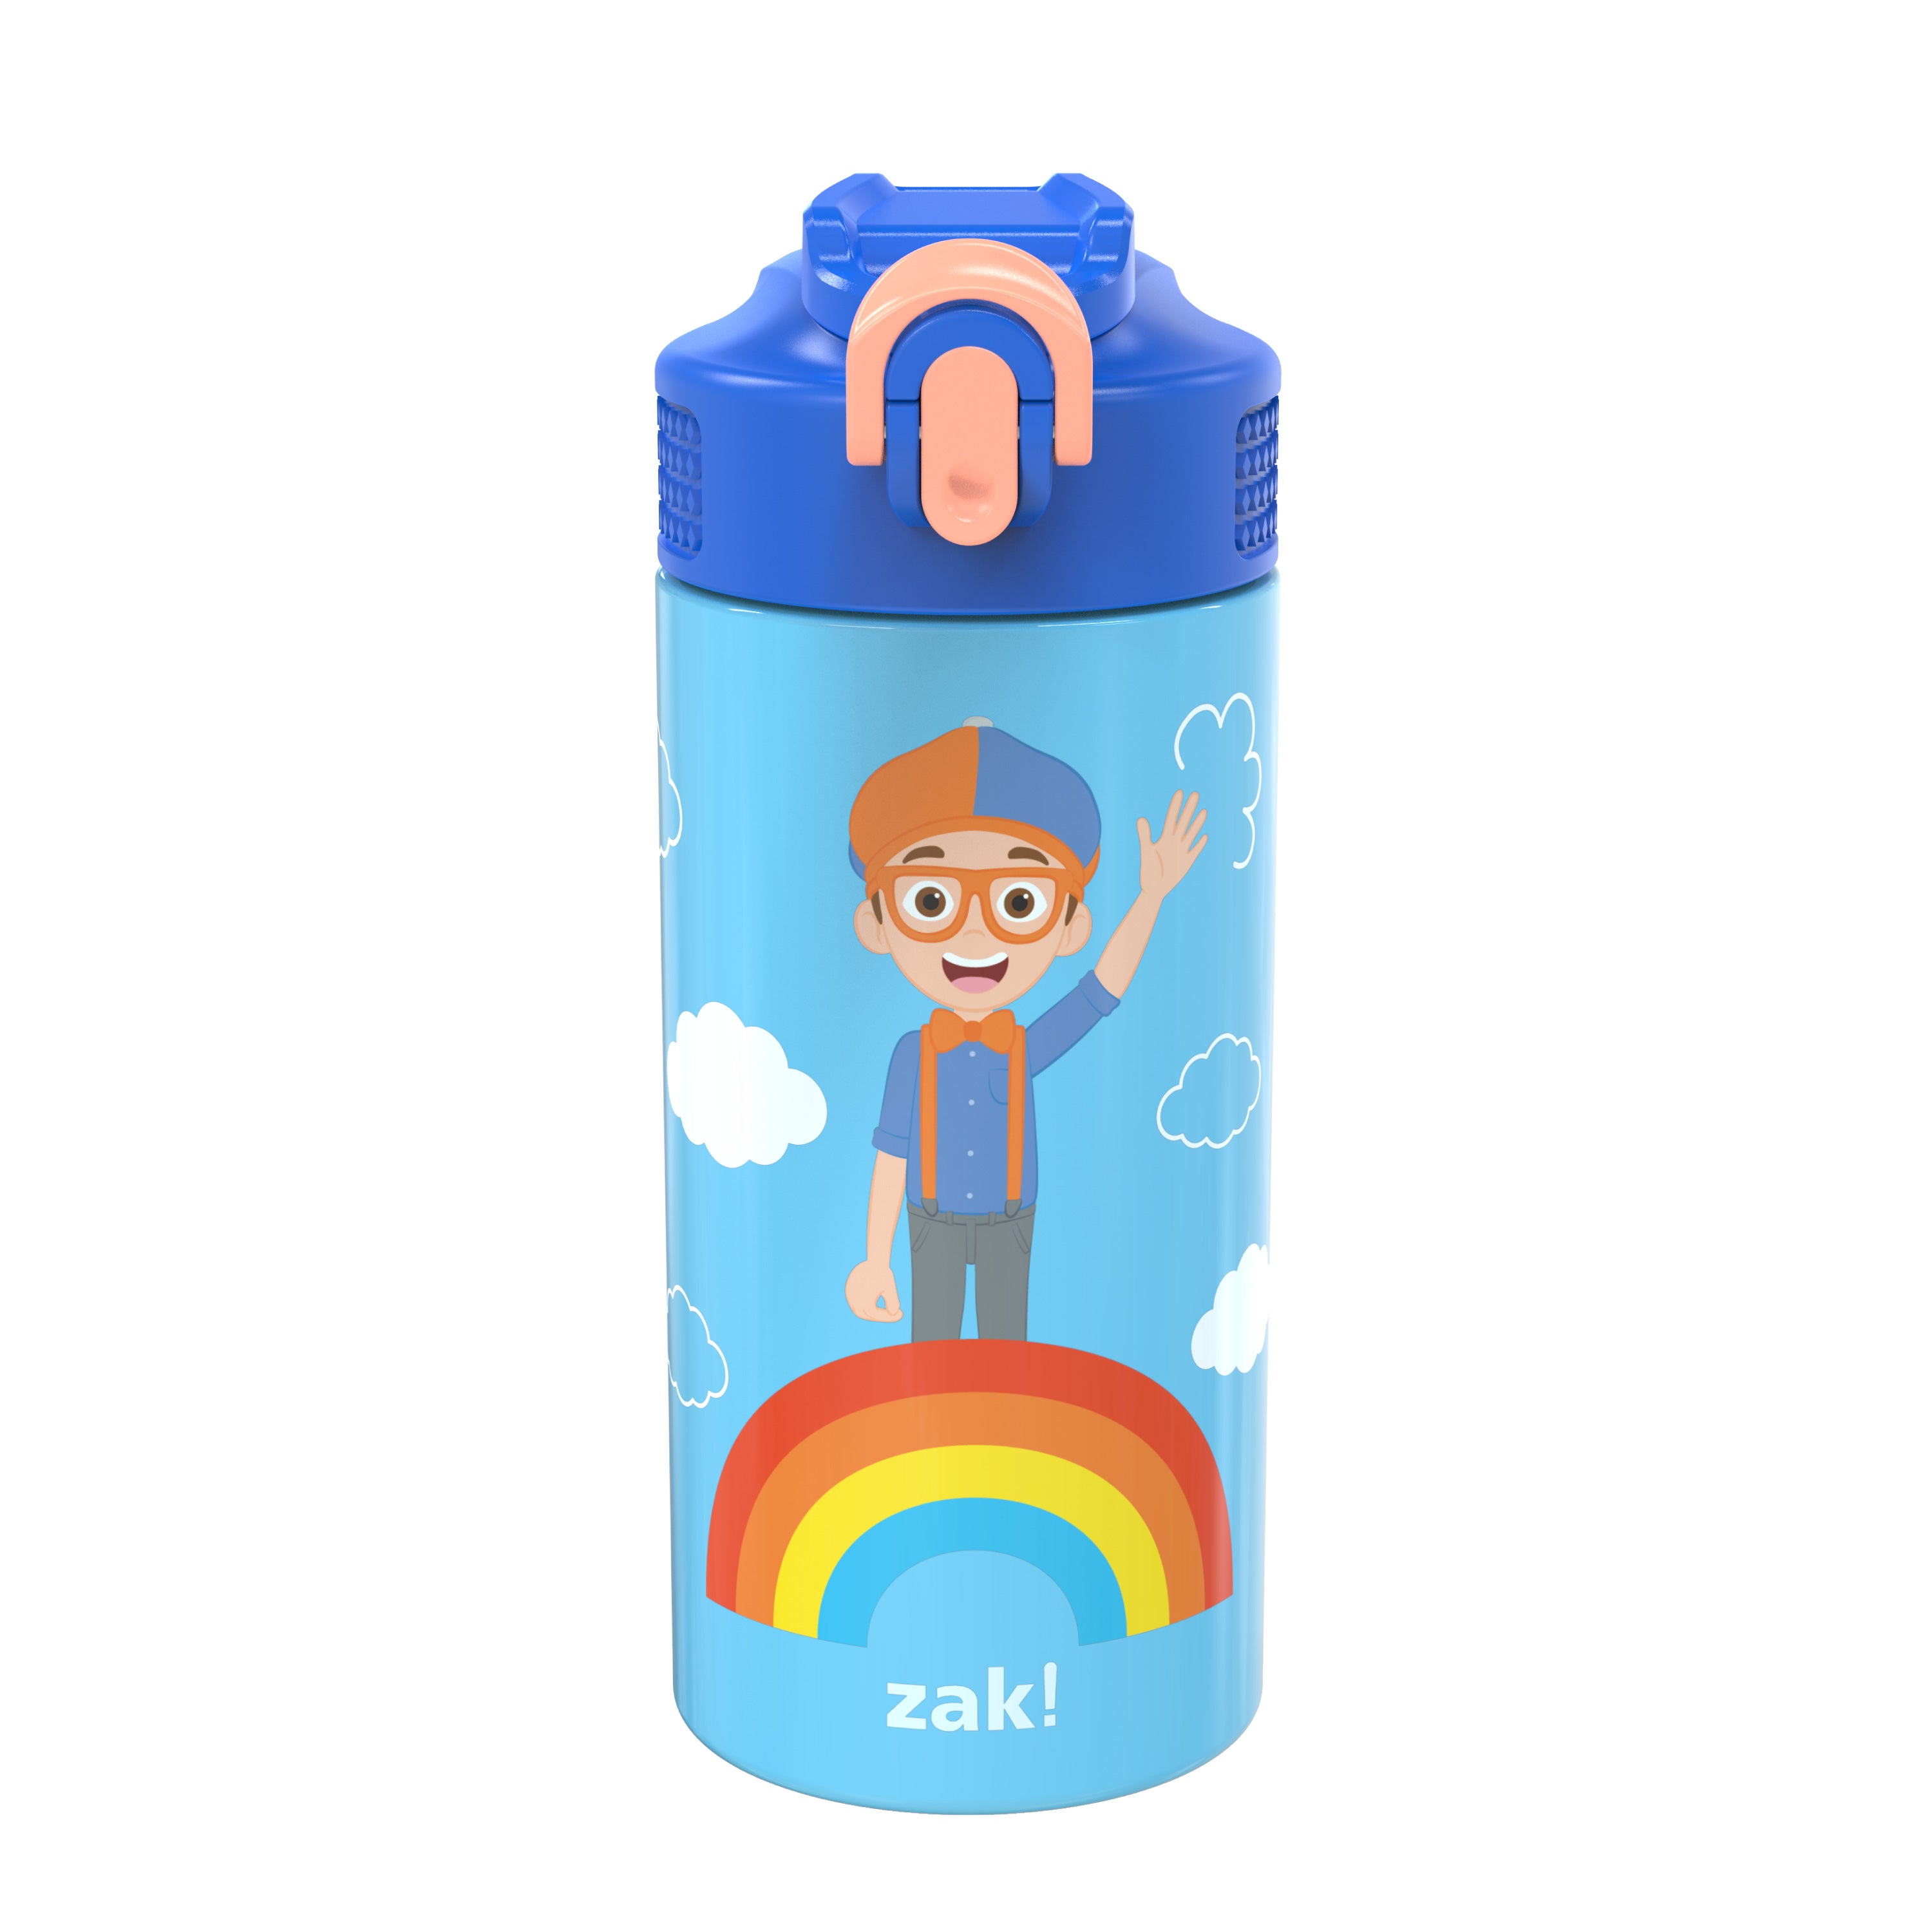 Blippi Kids Stainless Steel Leak Proof Water Bottle with Push Button Lid and Spout